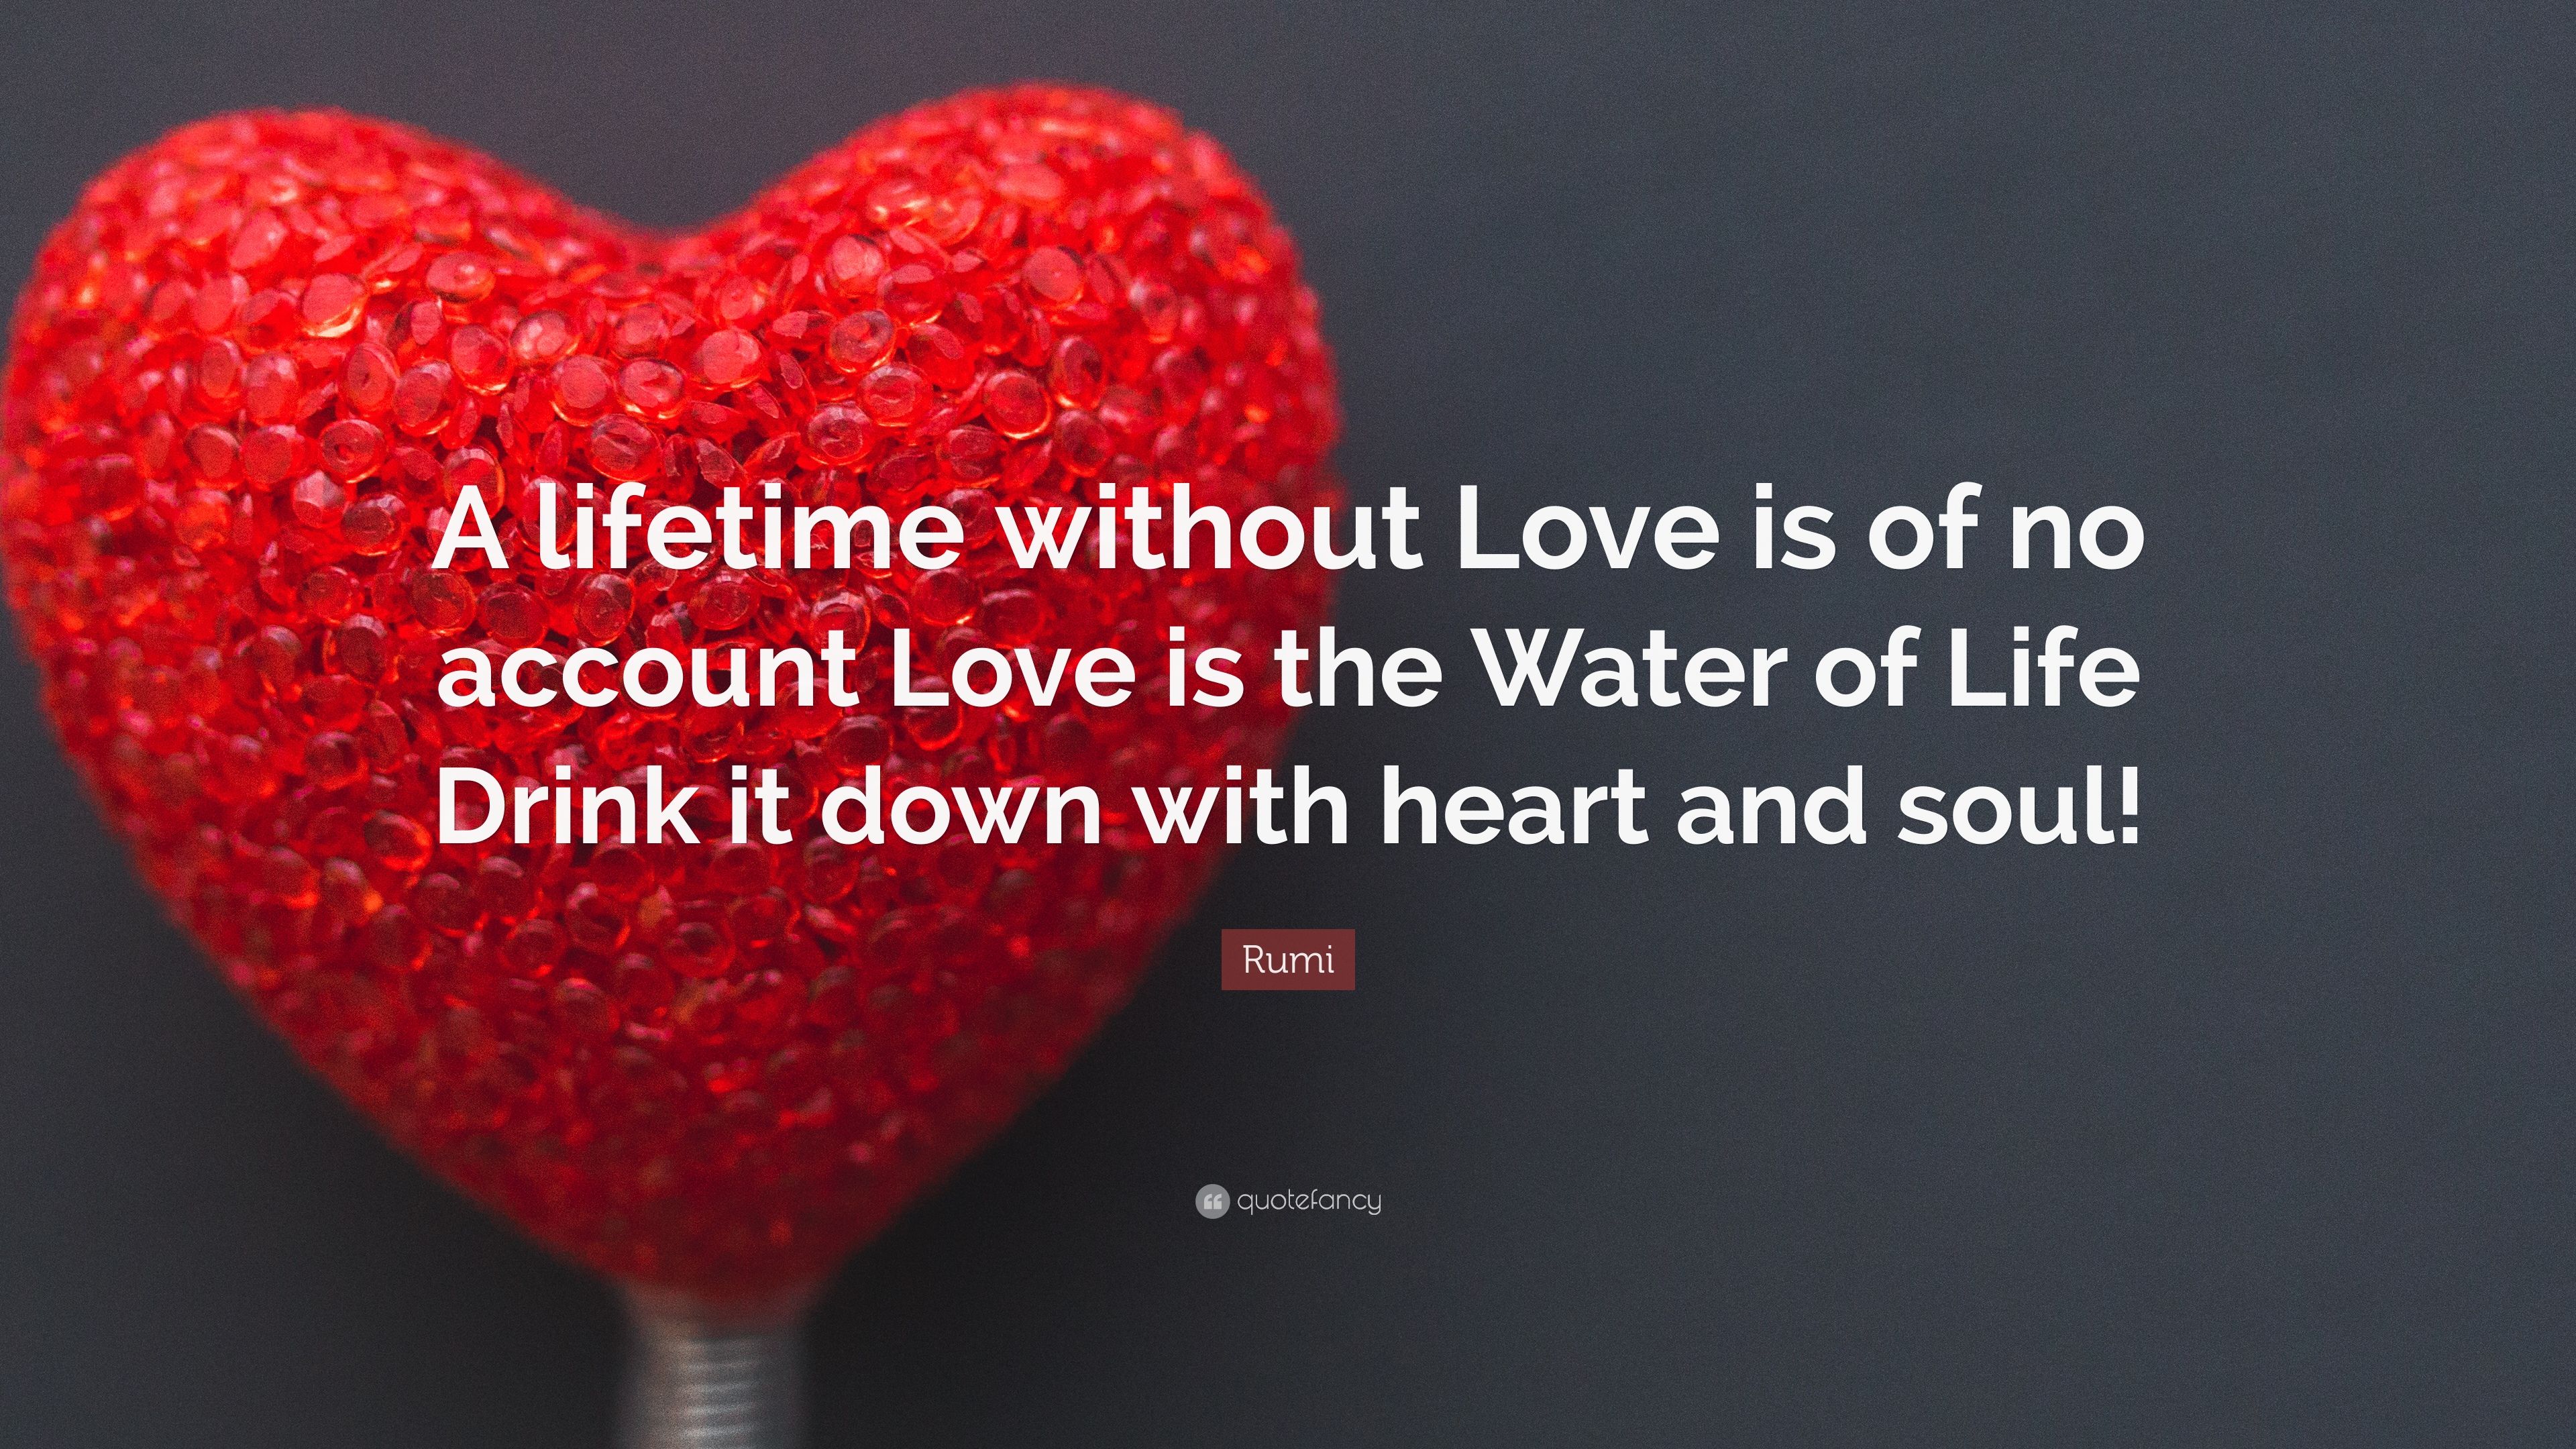 Rumi Quote: “A lifetime without Love is of no account Love is